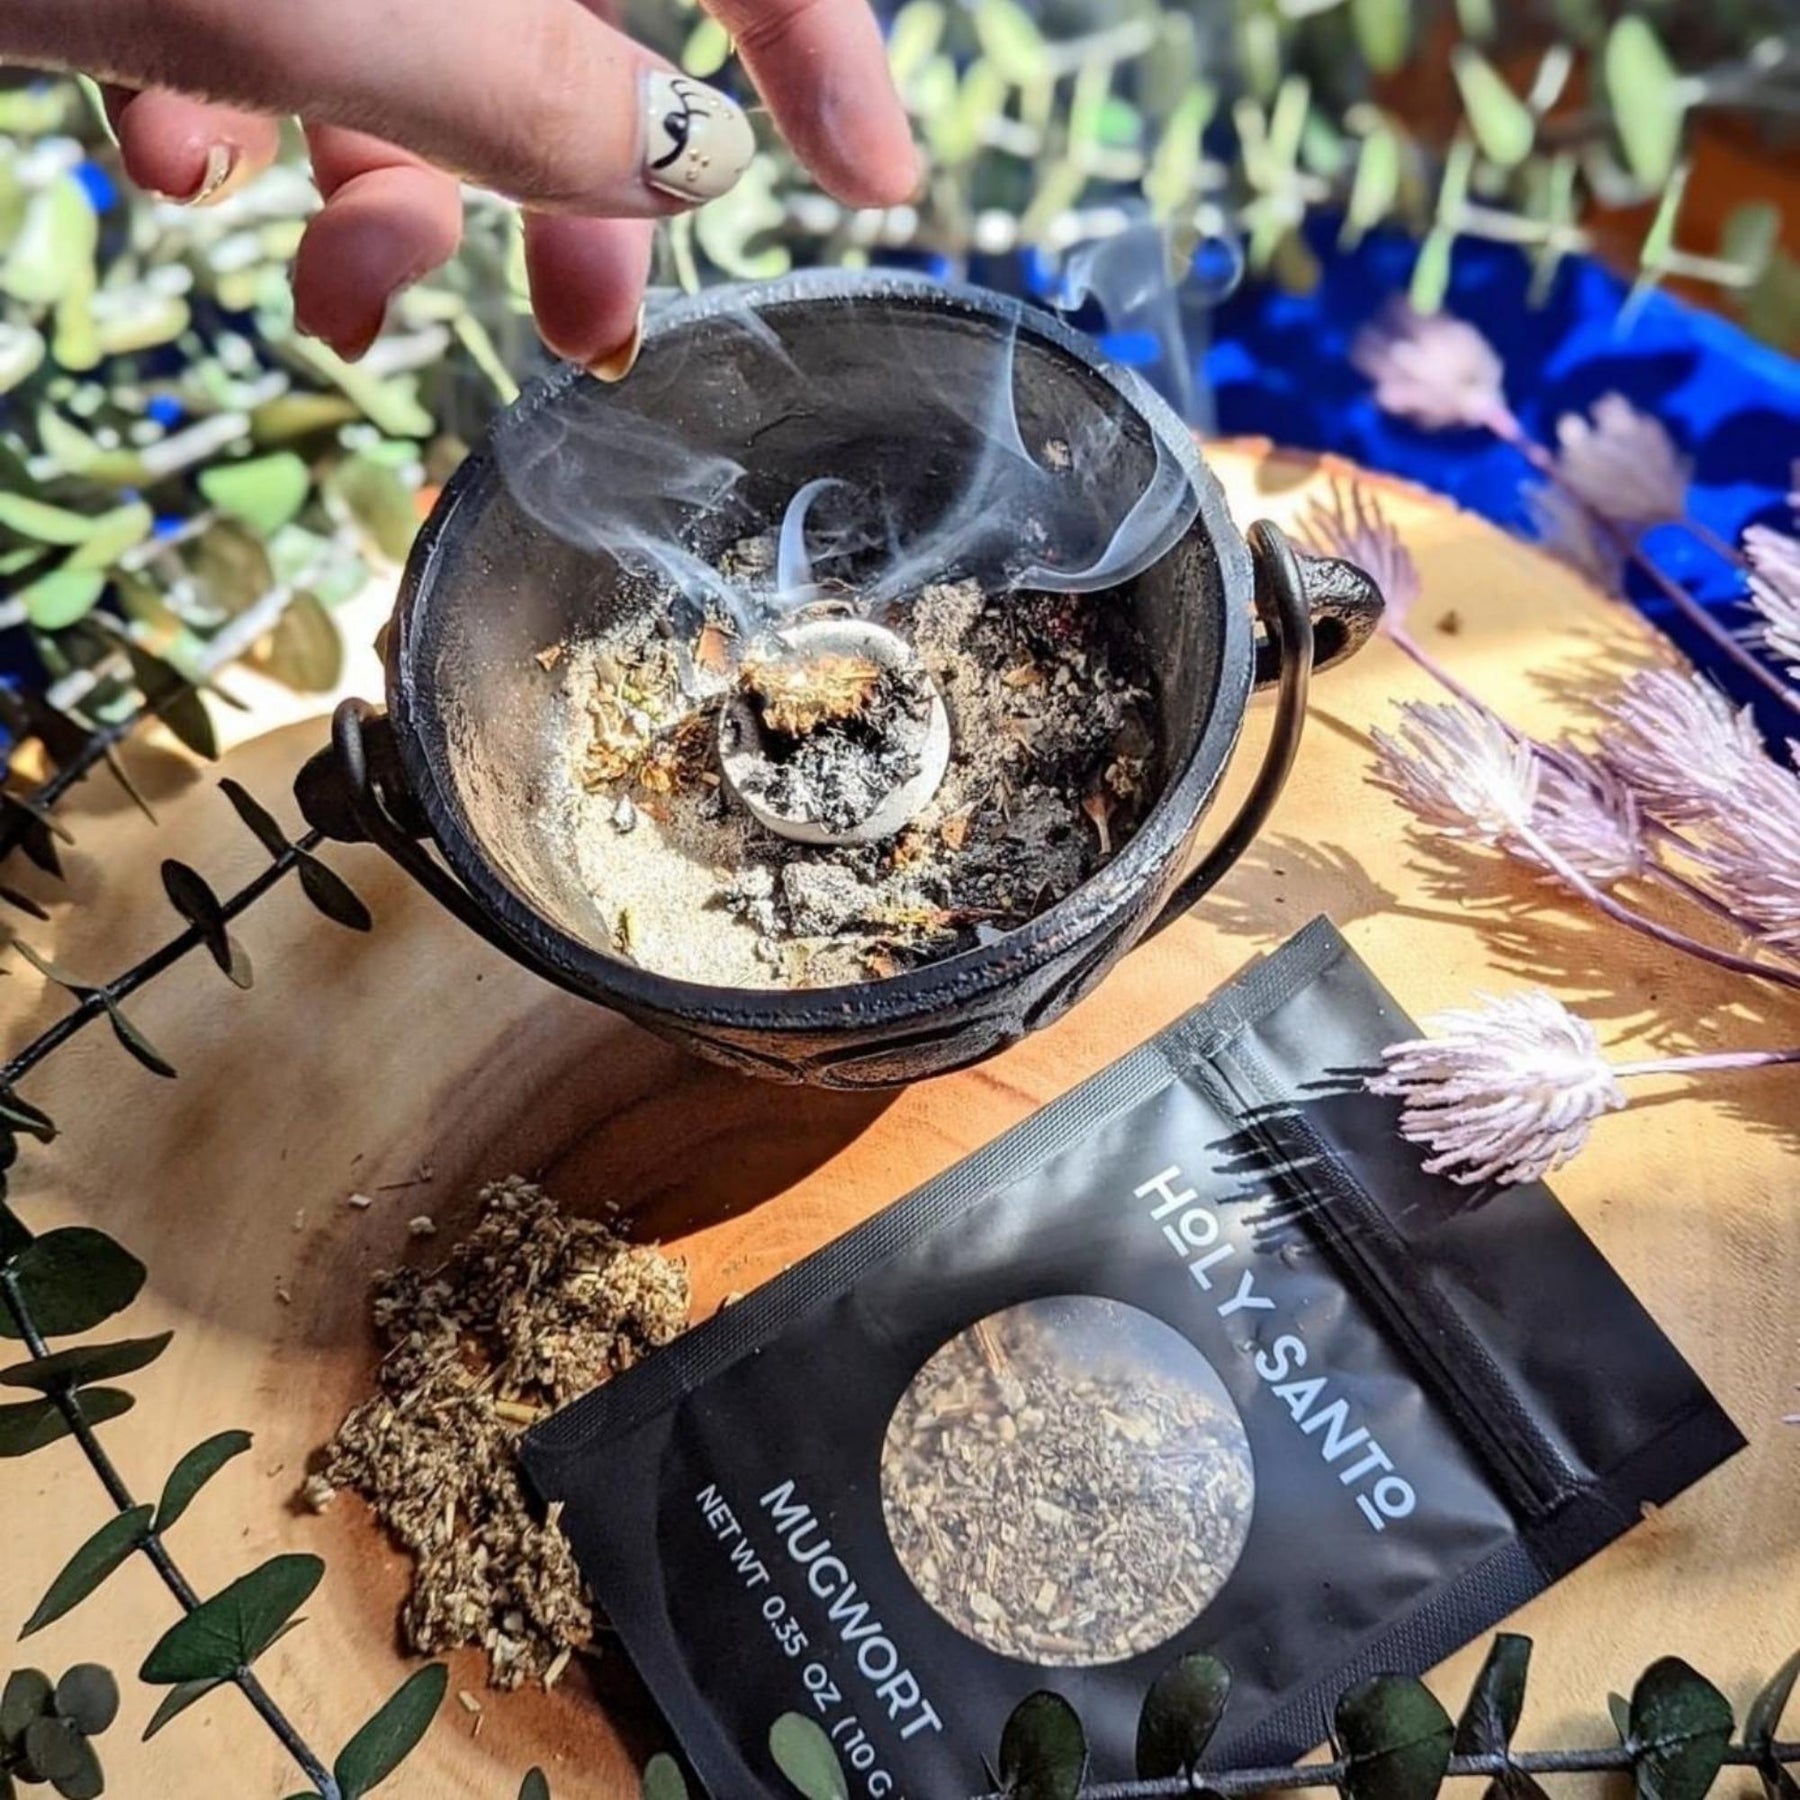  Holy Santo Organic Dried Herbs for Witchcraft Supplies Kit - 10  Witch Herbs for Spells with Crystal Spoon in Beginner Witchcraft Kit -  Witchy Gifts, Wiccan Herbs and Supplies, Spell Kits